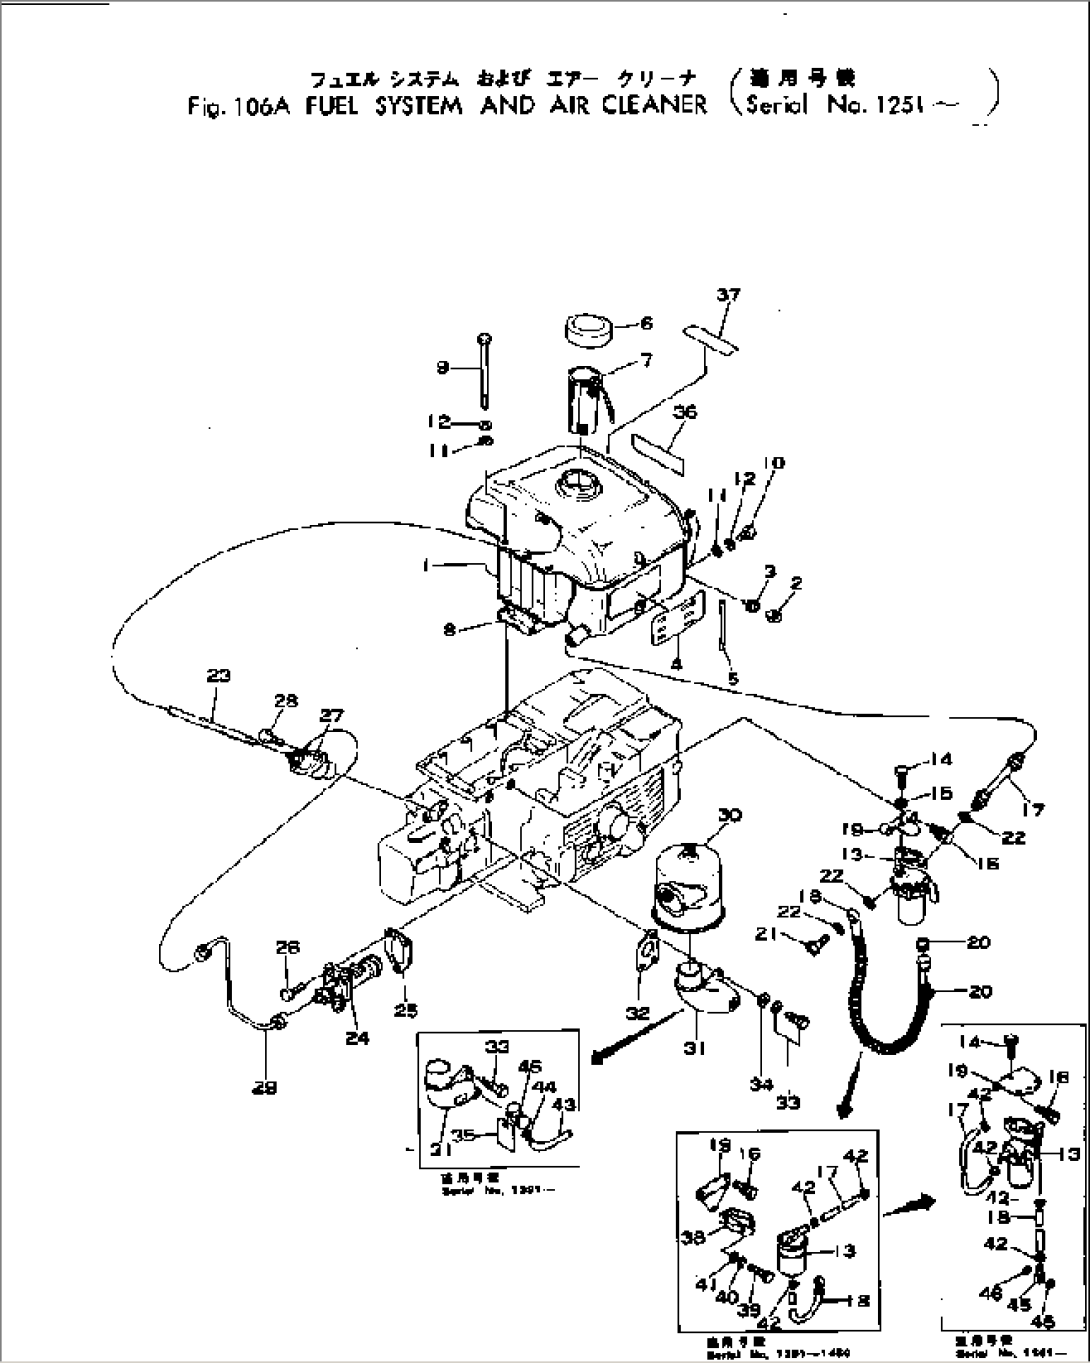 FUEL SYSTEM AND AIR CLEANER(#1251-)